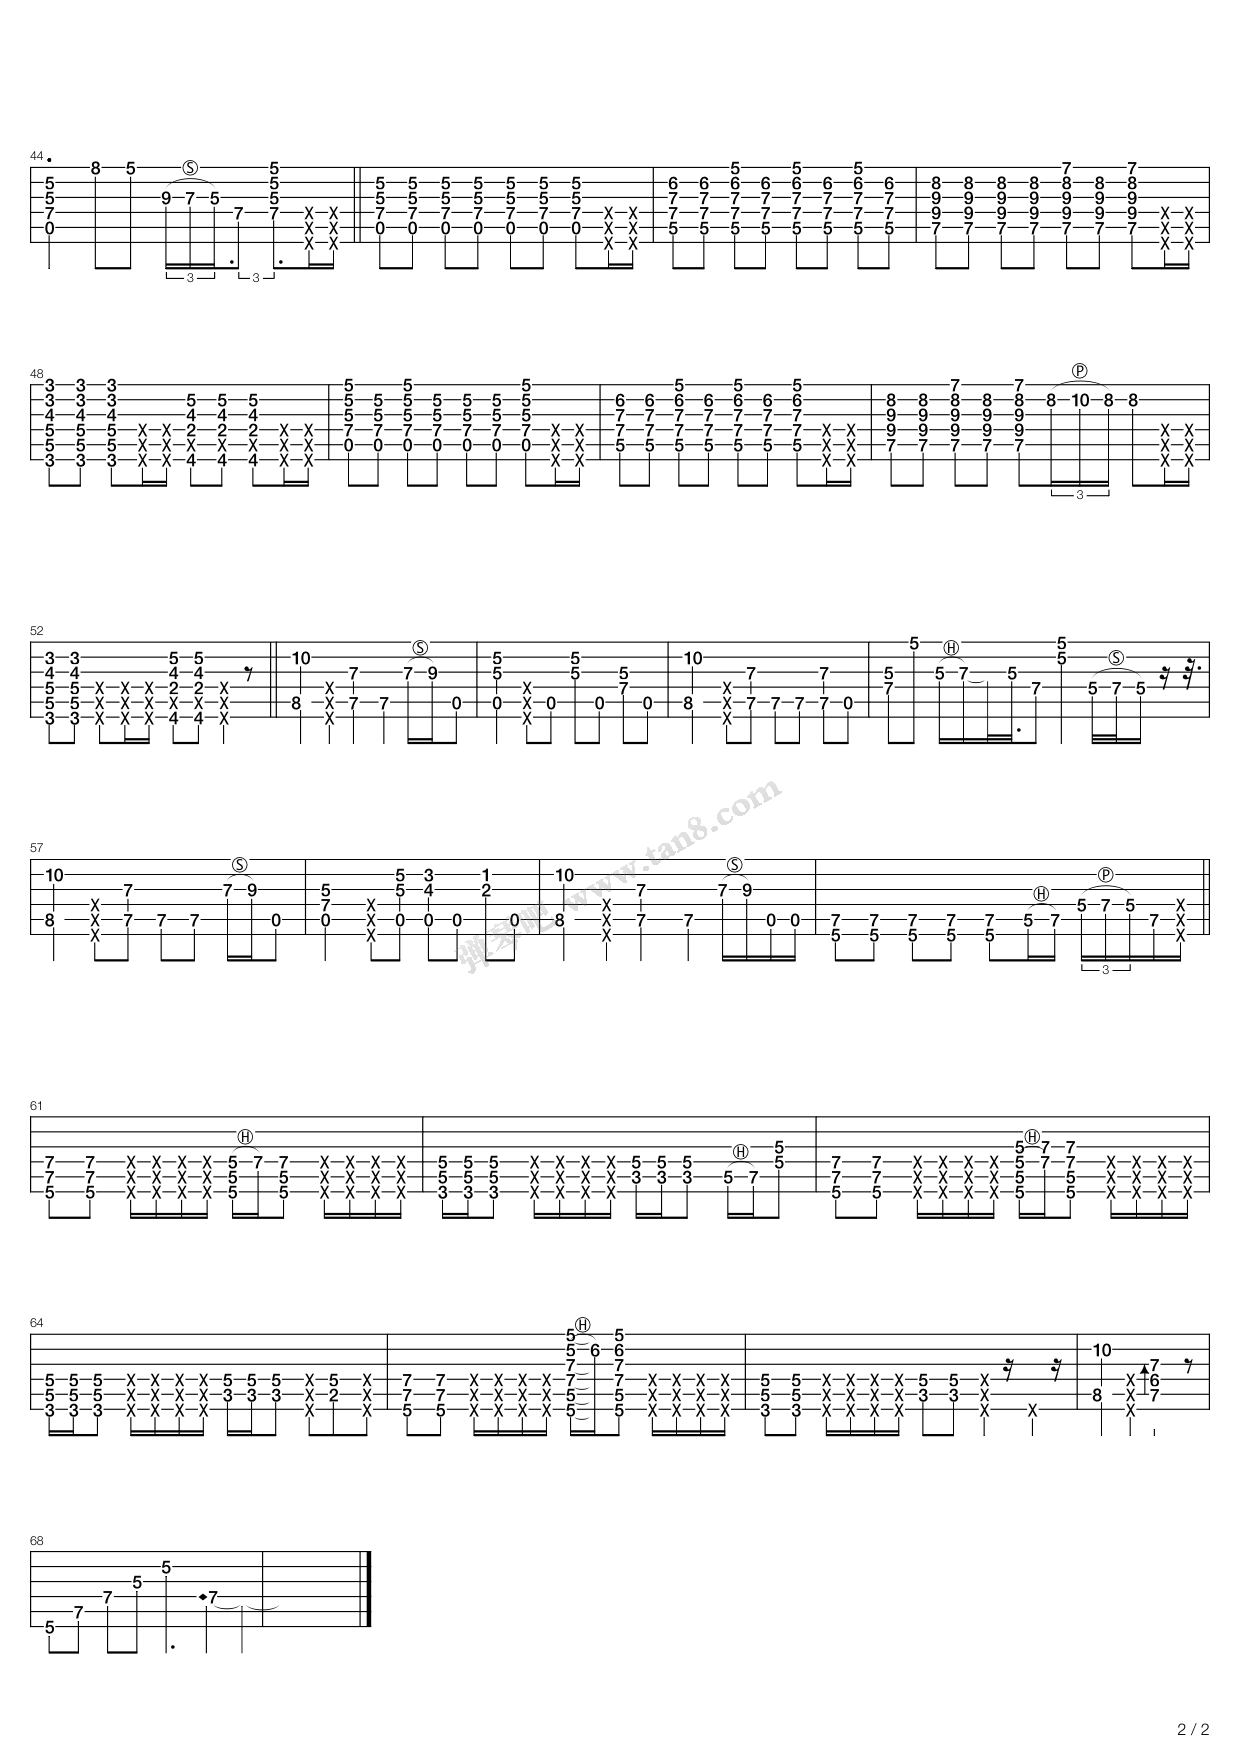 Boyfriend by Justin Bieber - Acoustic Version Guitar Tabs Chords Notes Sheet Music Free